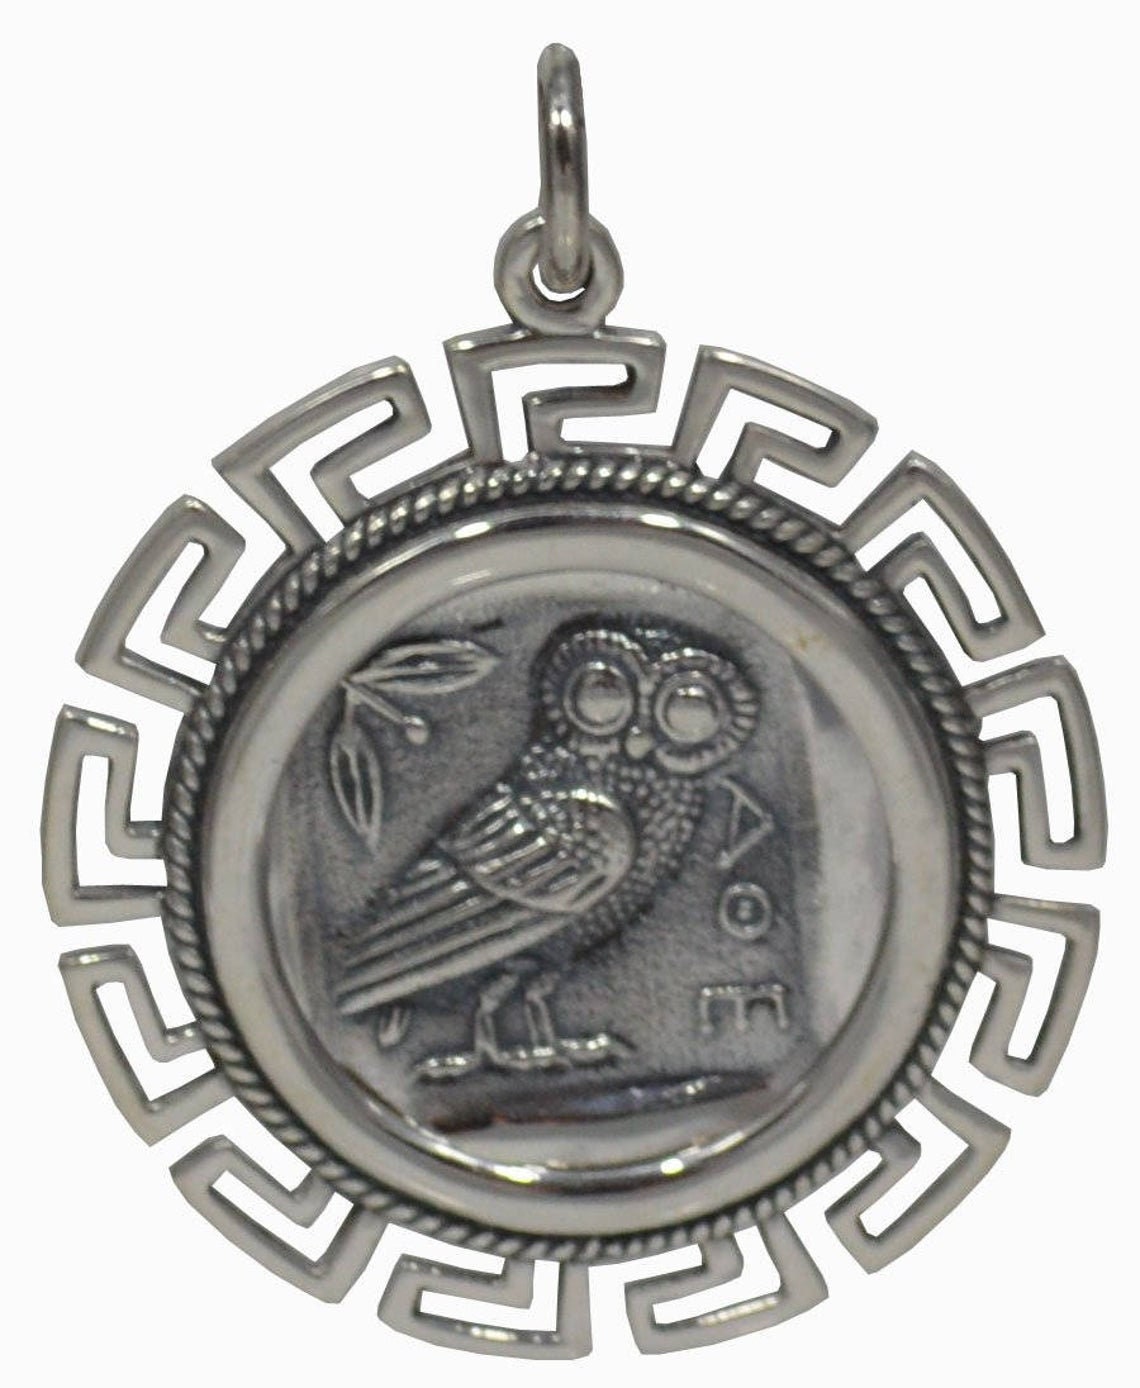 Owl Of Wisdom and Knowledge - Goddess Athena Minerva and Meander Design - Ancient Greece  - Pendant - 925 Sterling Silver